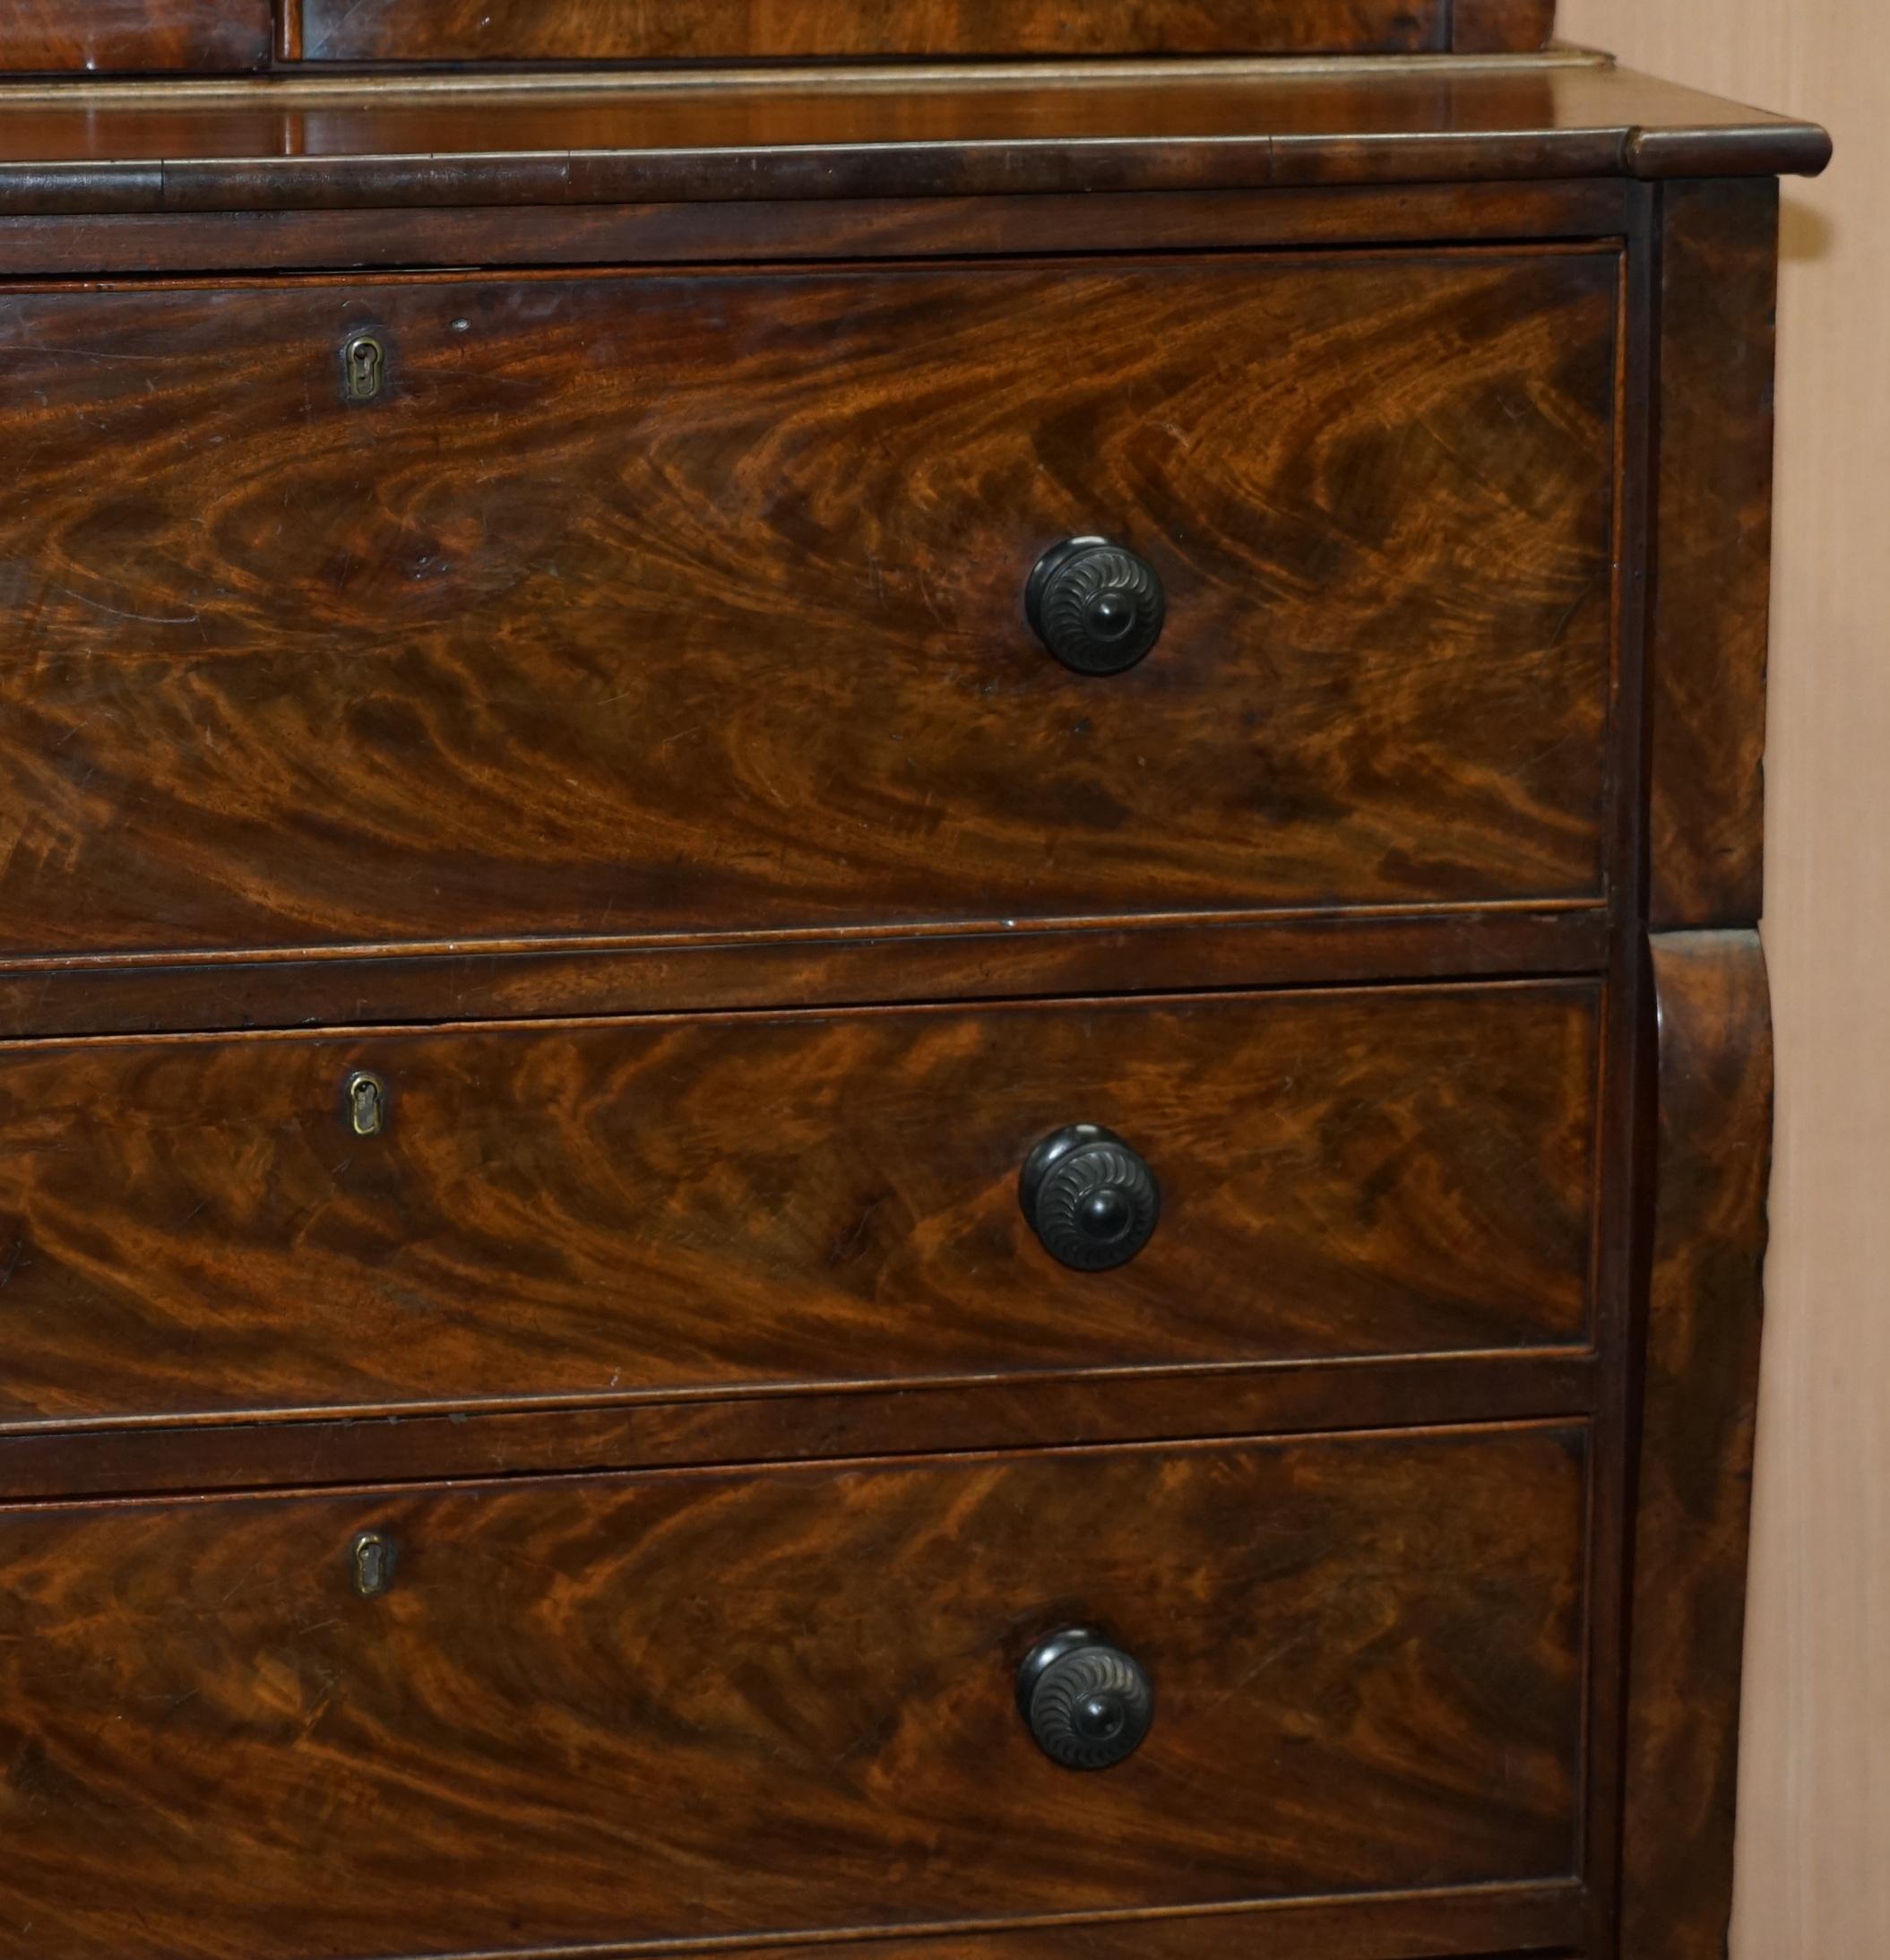 English Rare Victorian Flamed Hardwood Library Bookcase Secretaire Desk Chest of Drawers For Sale